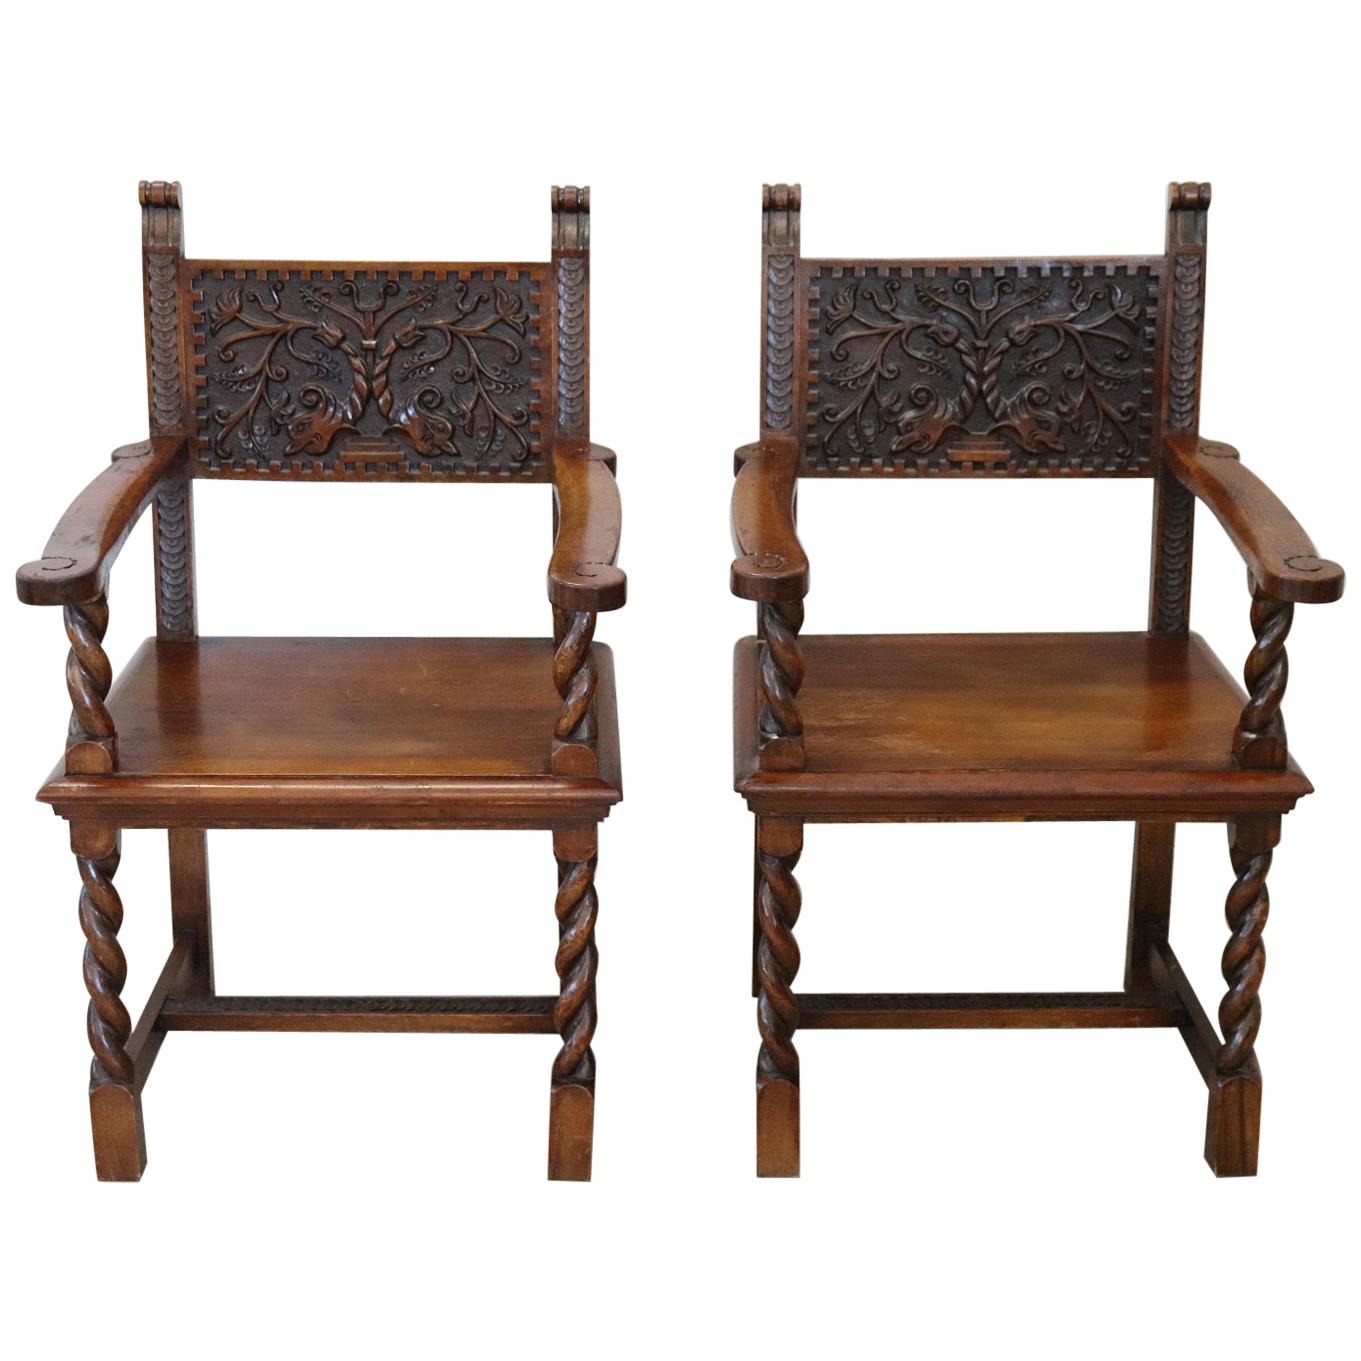 19th Century Italian Renaissance Style Carved Walnut Pair of Throne Chairs